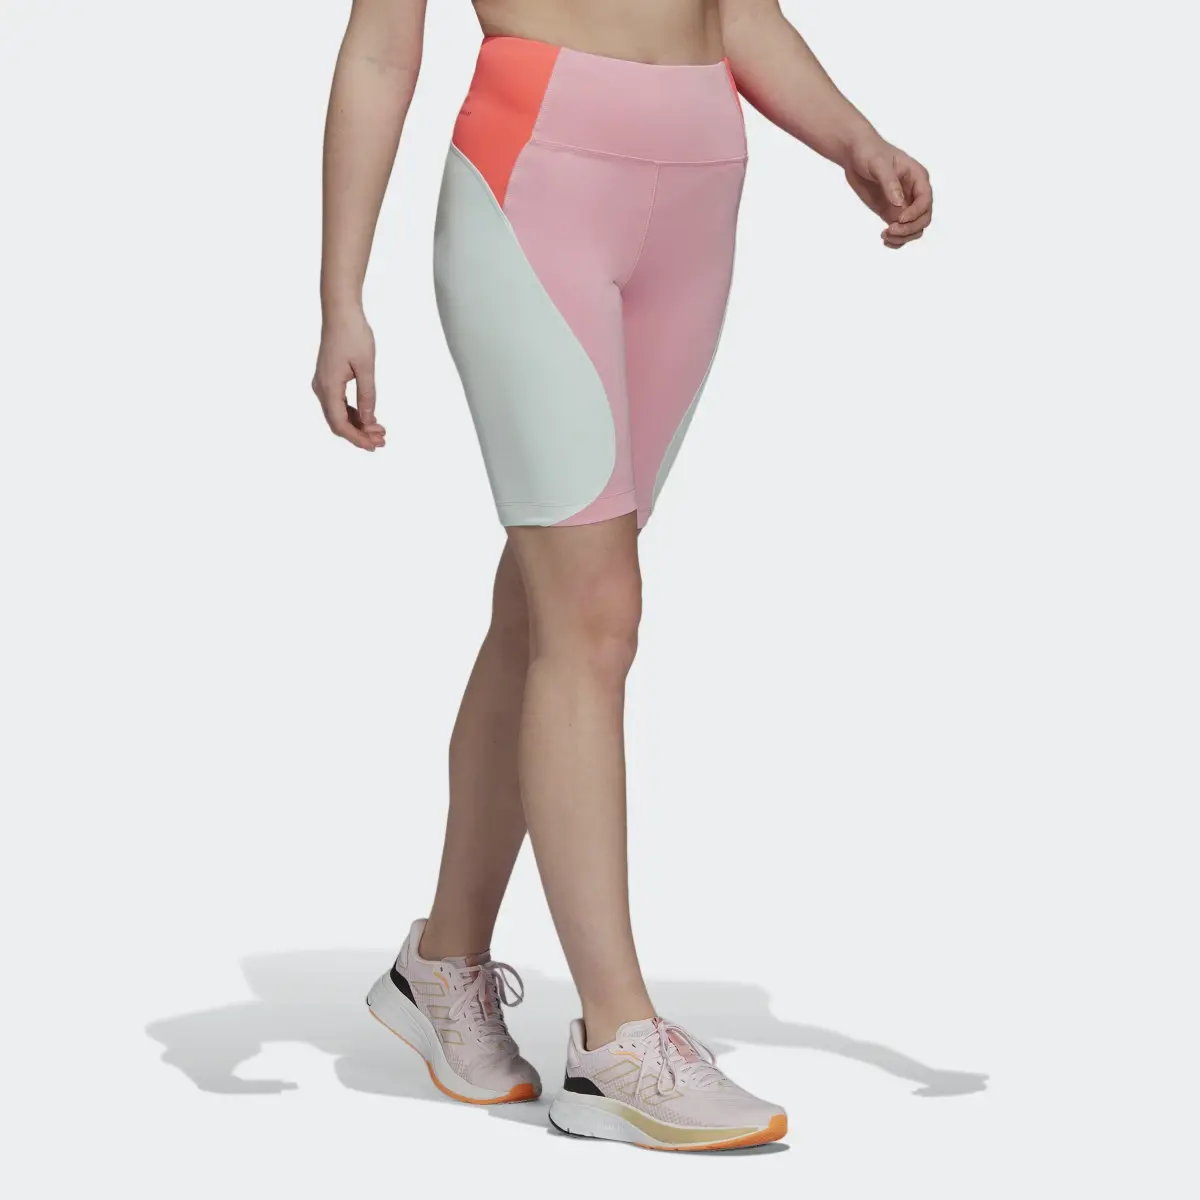 Adidas Designed to Move Colorblock Short Sport Tights. 3